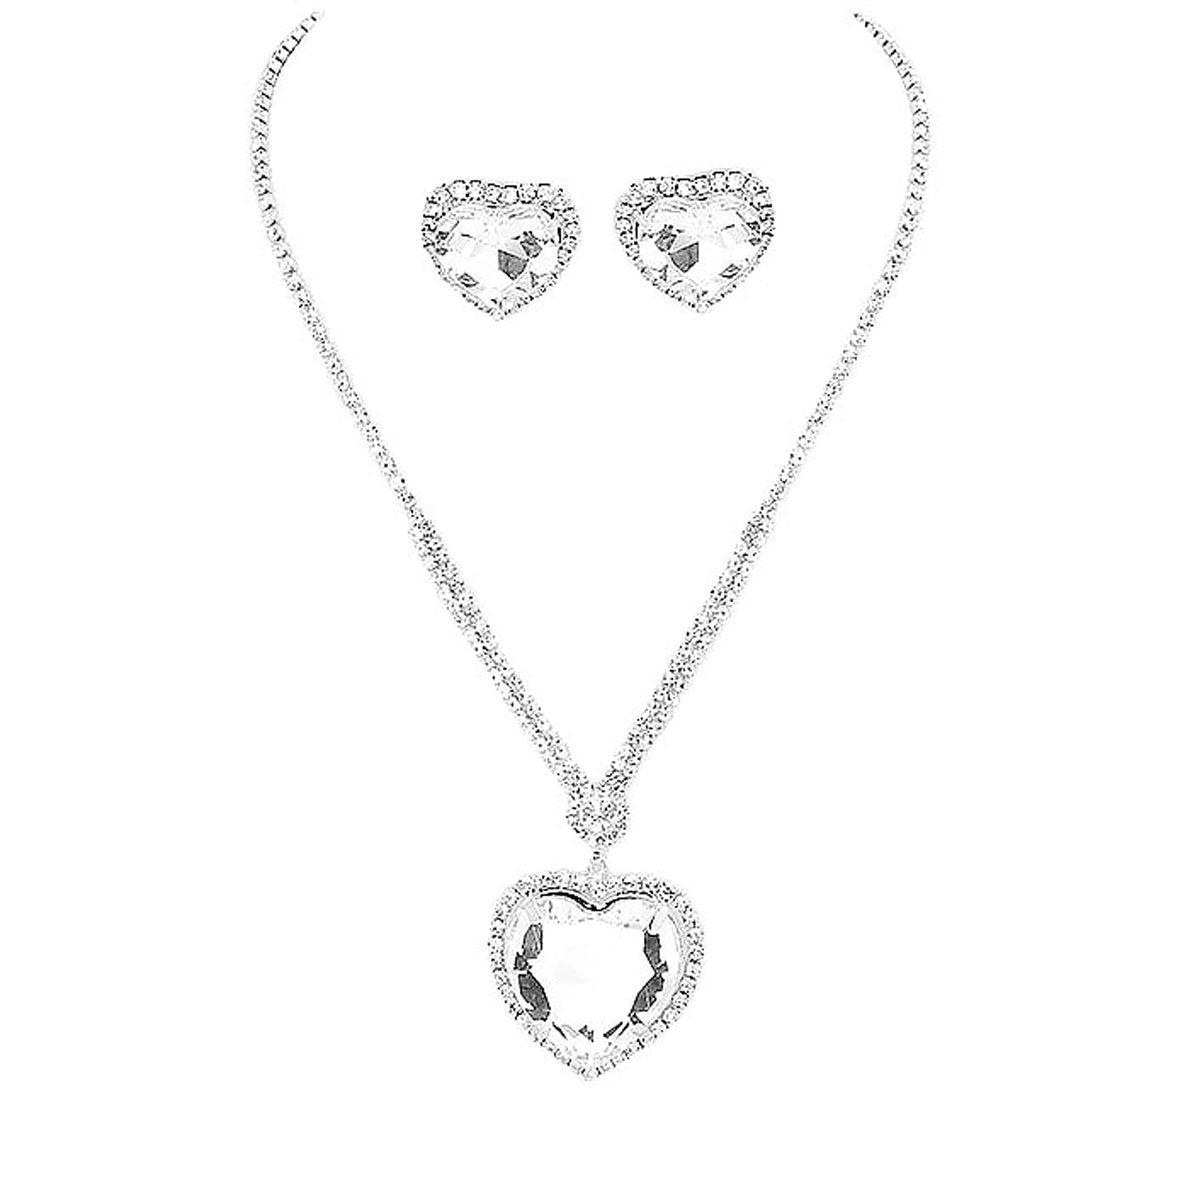 Gold Rhinestone Pave Crystal Heart Pendant Necklace, Get ready with these Pendant Necklace, put on a pop of color to complete your ensemble. Perfect for adding just the right amount of shimmer & shine and a touch of class to special events. Perfect Birthday Gift, Anniversary Gift, Mother's Day Gift, Graduation Gift.